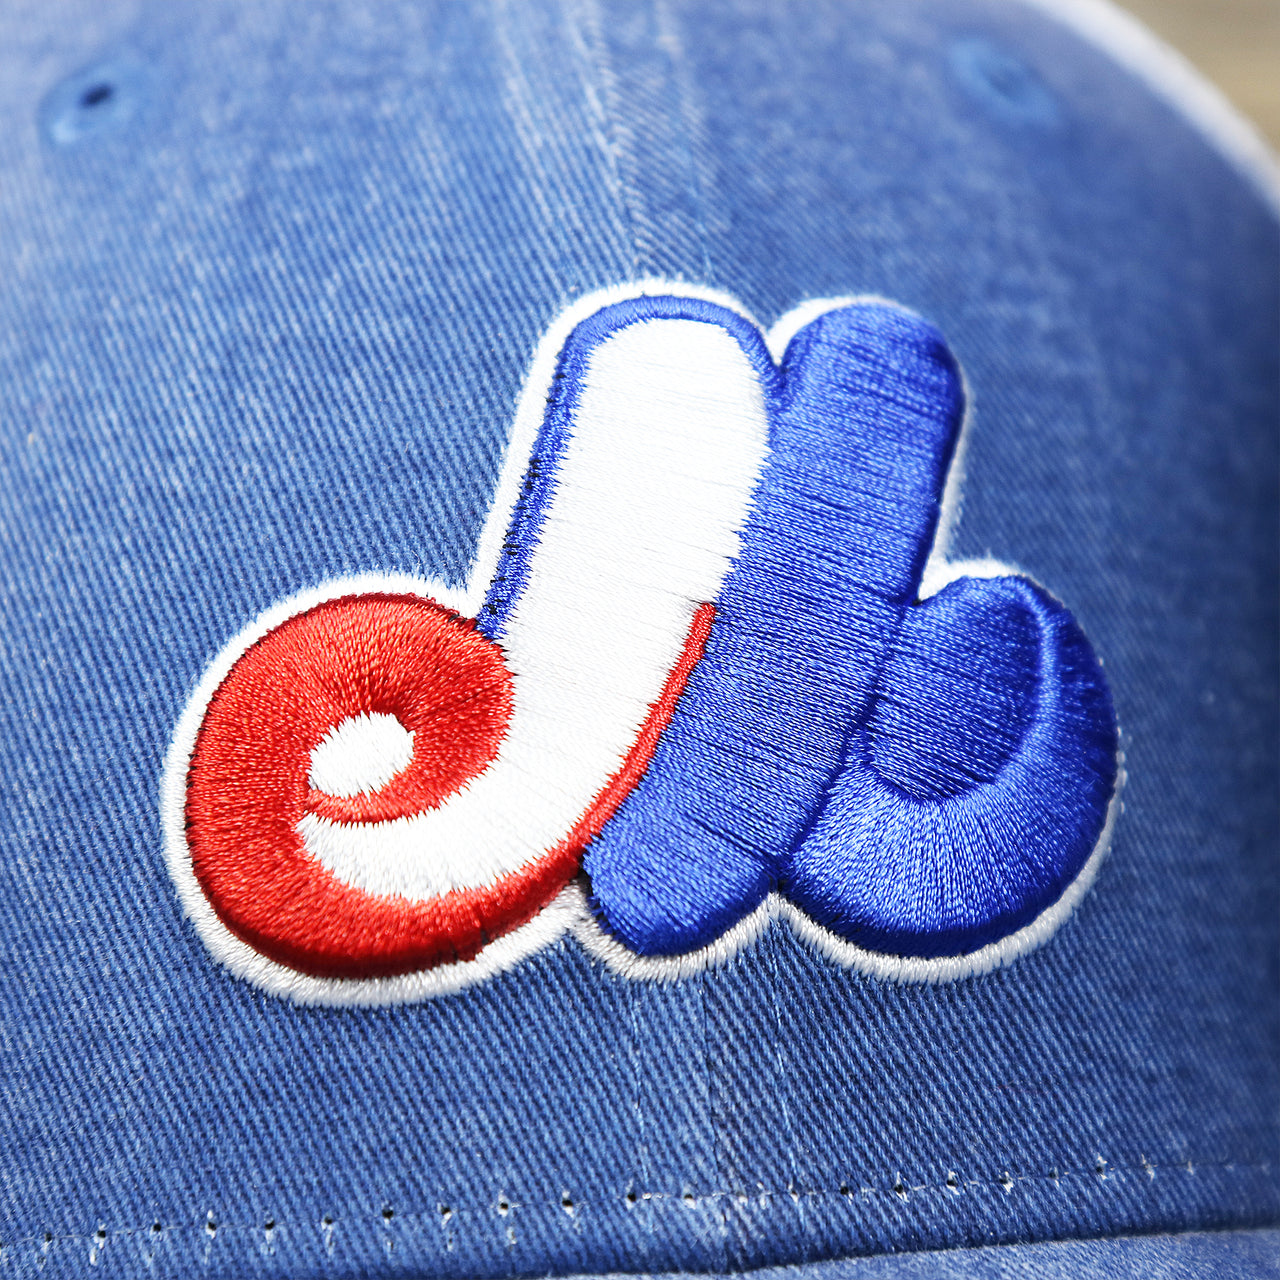 The Retro Expos Logo on the Cooperstown Montreal Expos 1969s Logo Worn Colorway Mesh Back 9Forty Dad Hat | Royal Blue 9Forty Hat